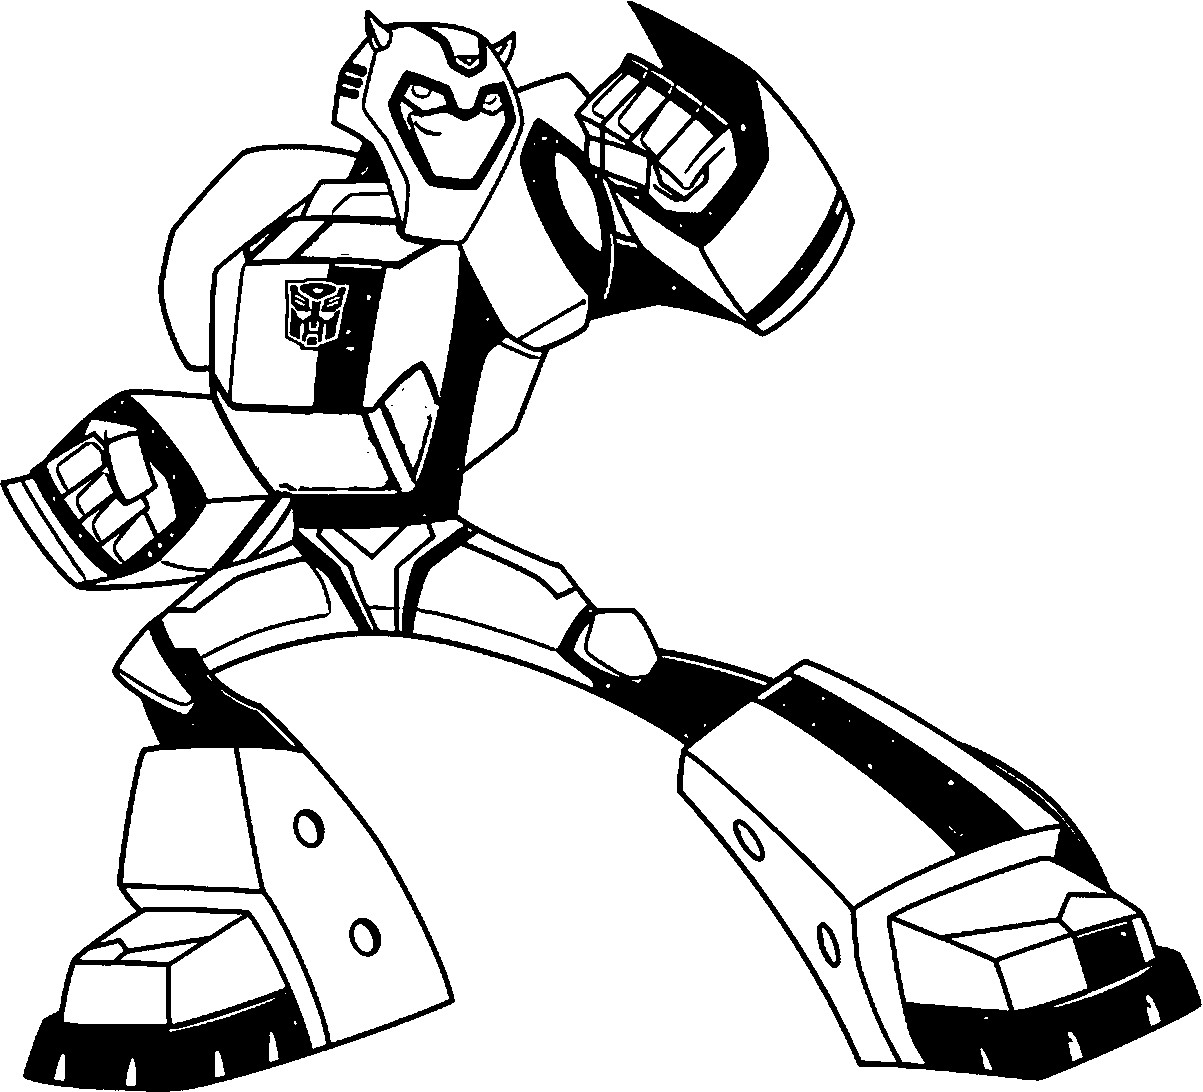 Free Printable Transformer Coloring Pages